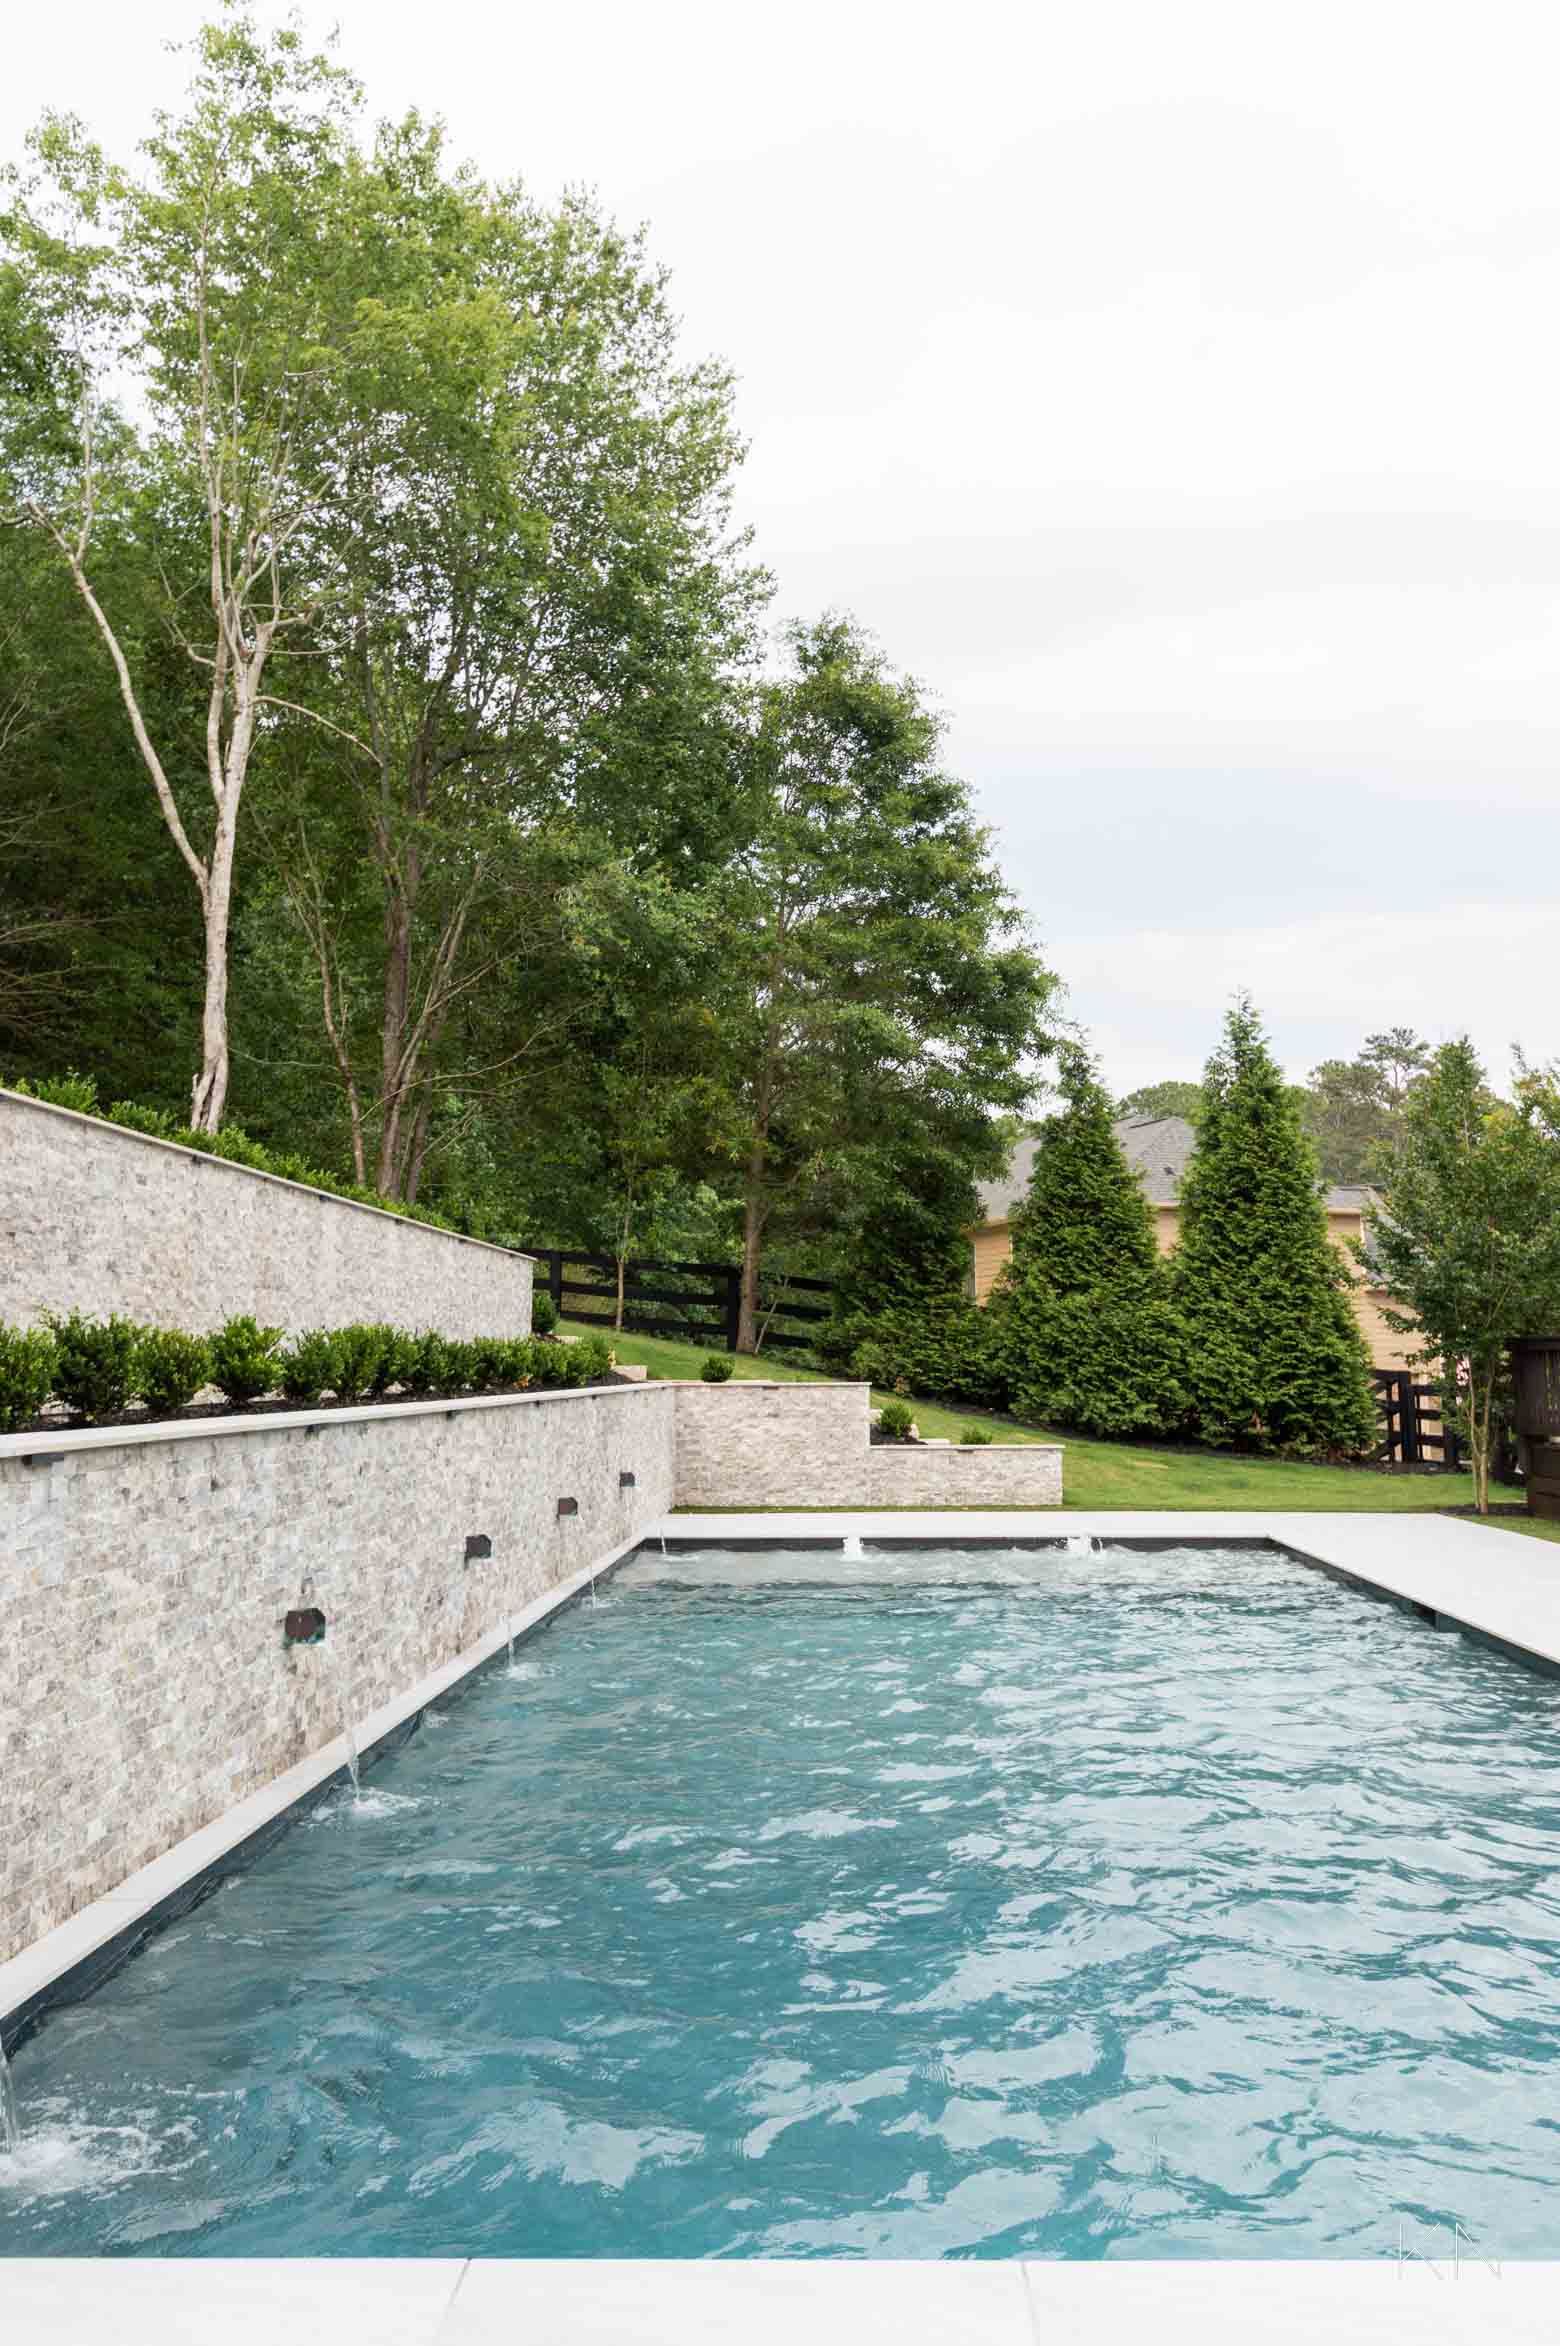 Two Retaining Wall Pool Design with Scuppers / Waterfalls